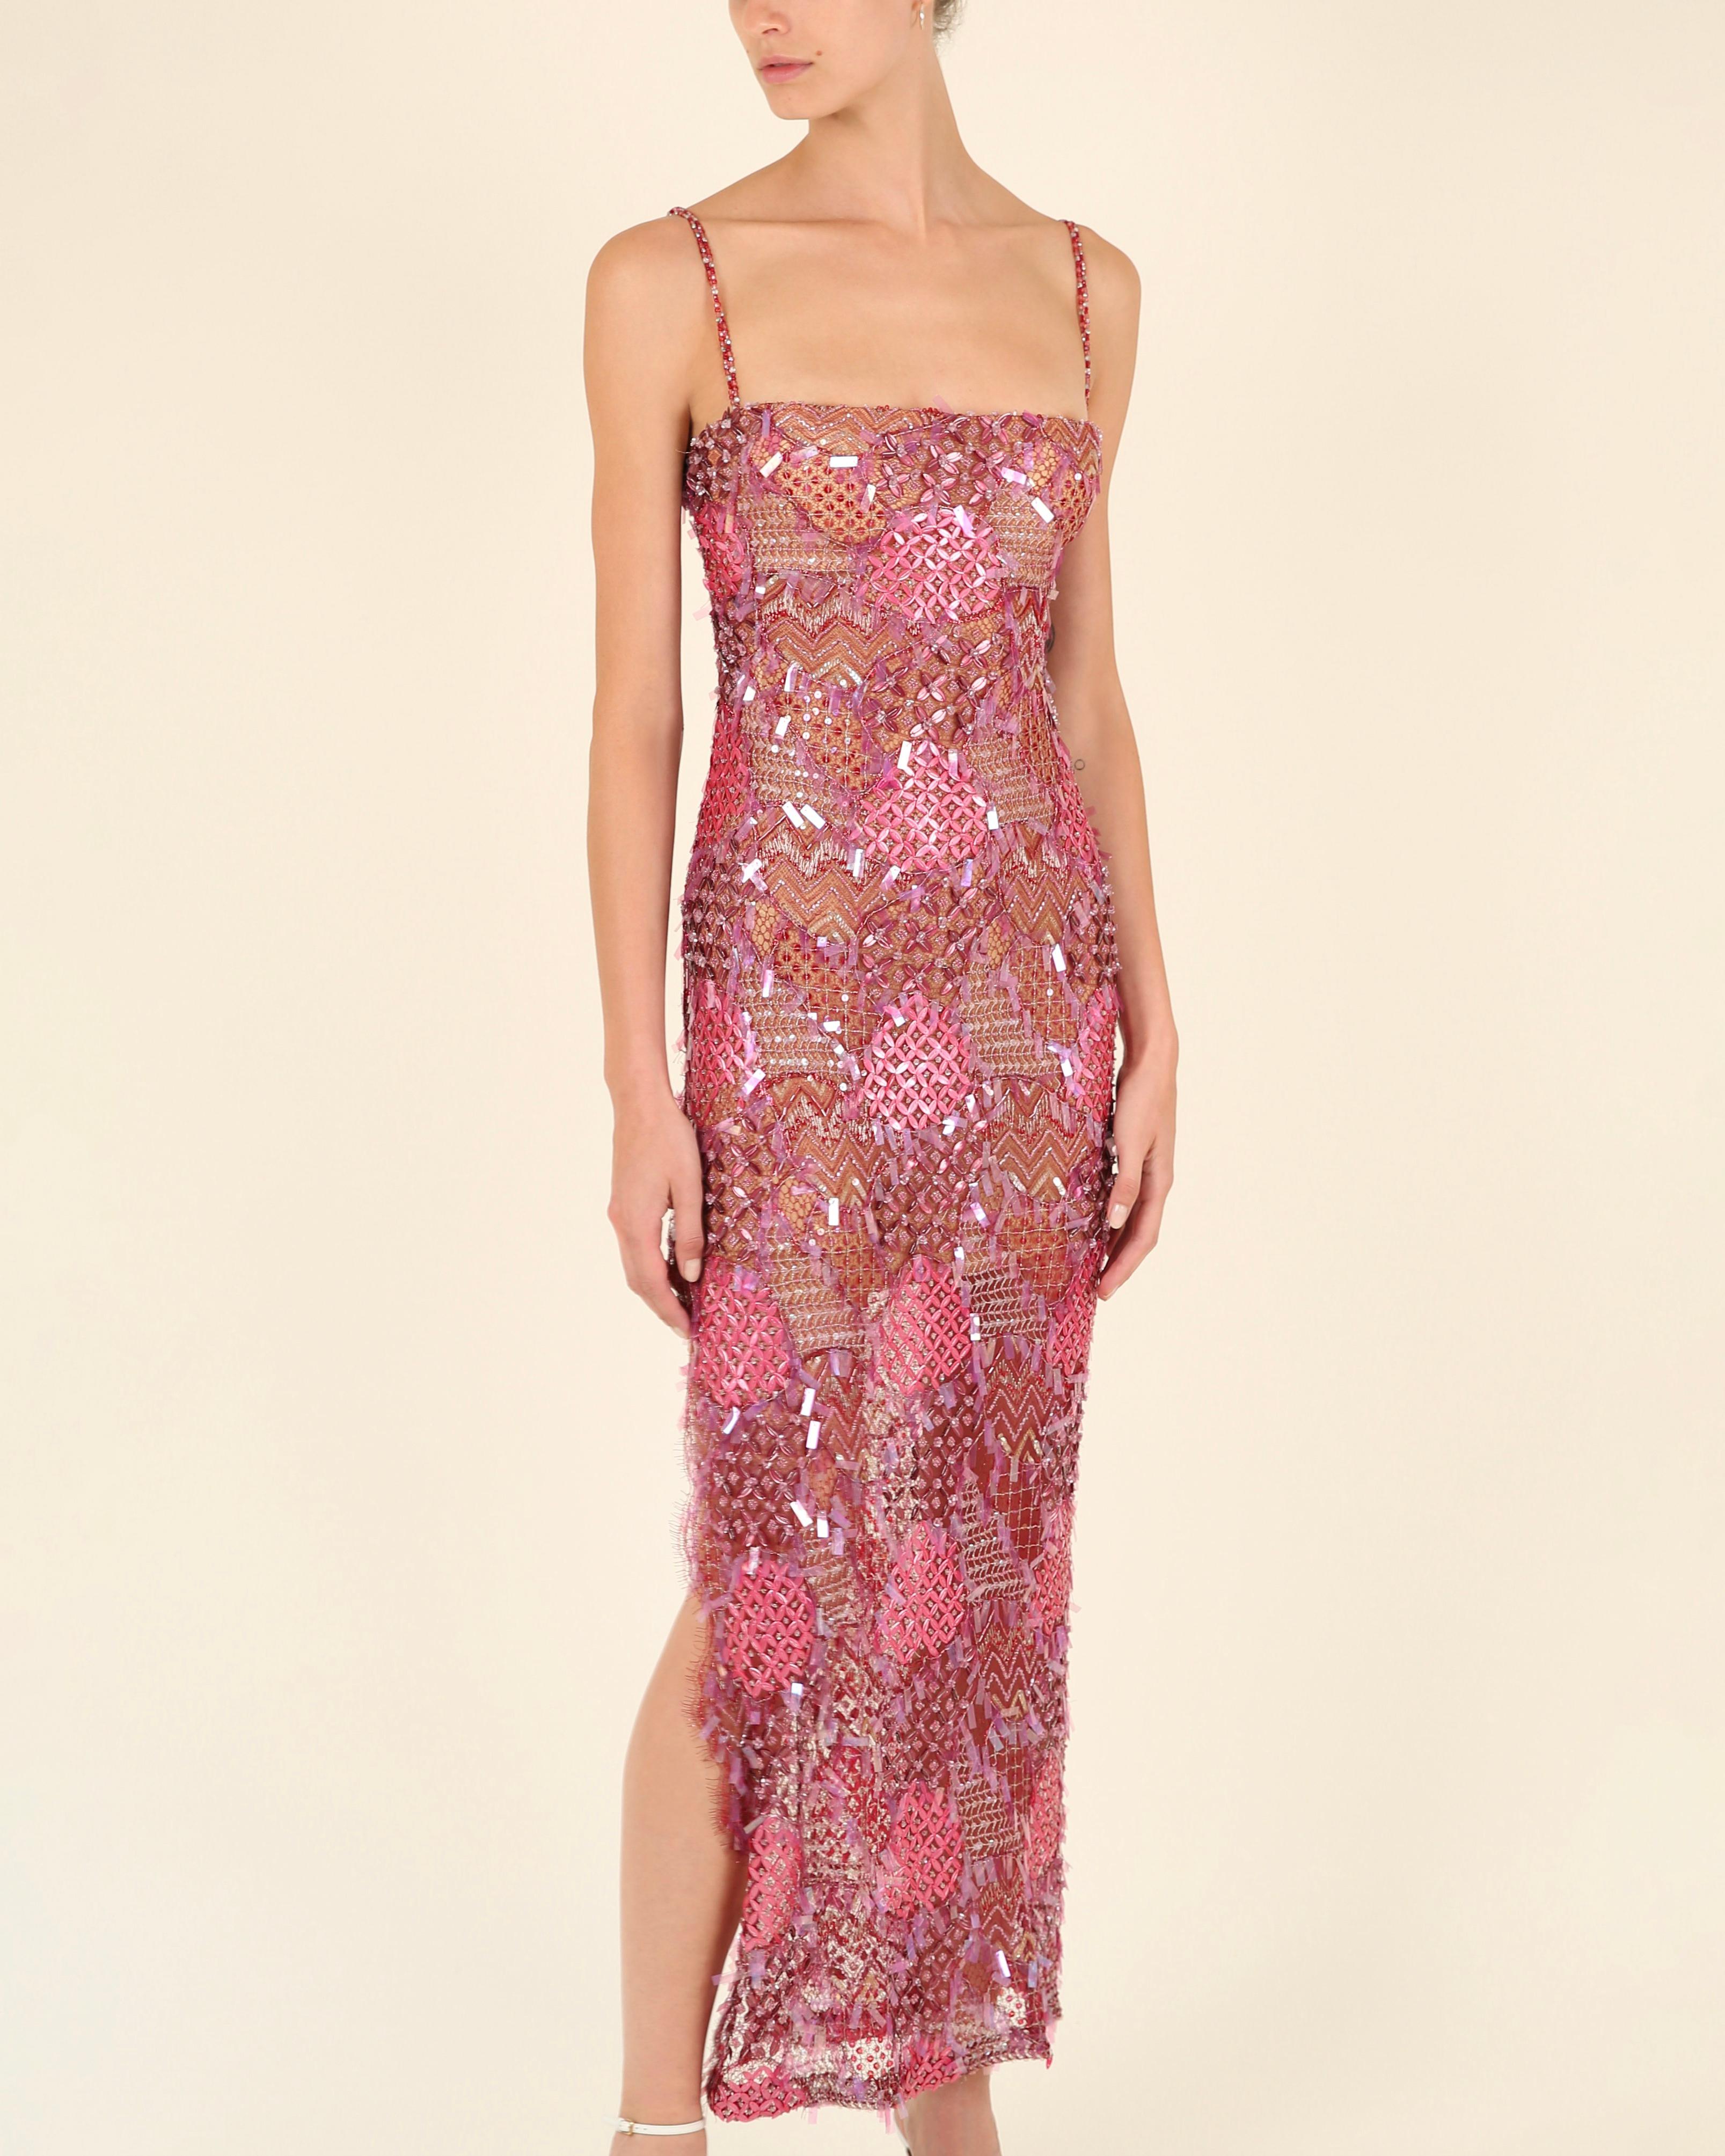 Loris Azzaro couture pink embellished sequin beaded sheer slit bustier dress XS For Sale 1